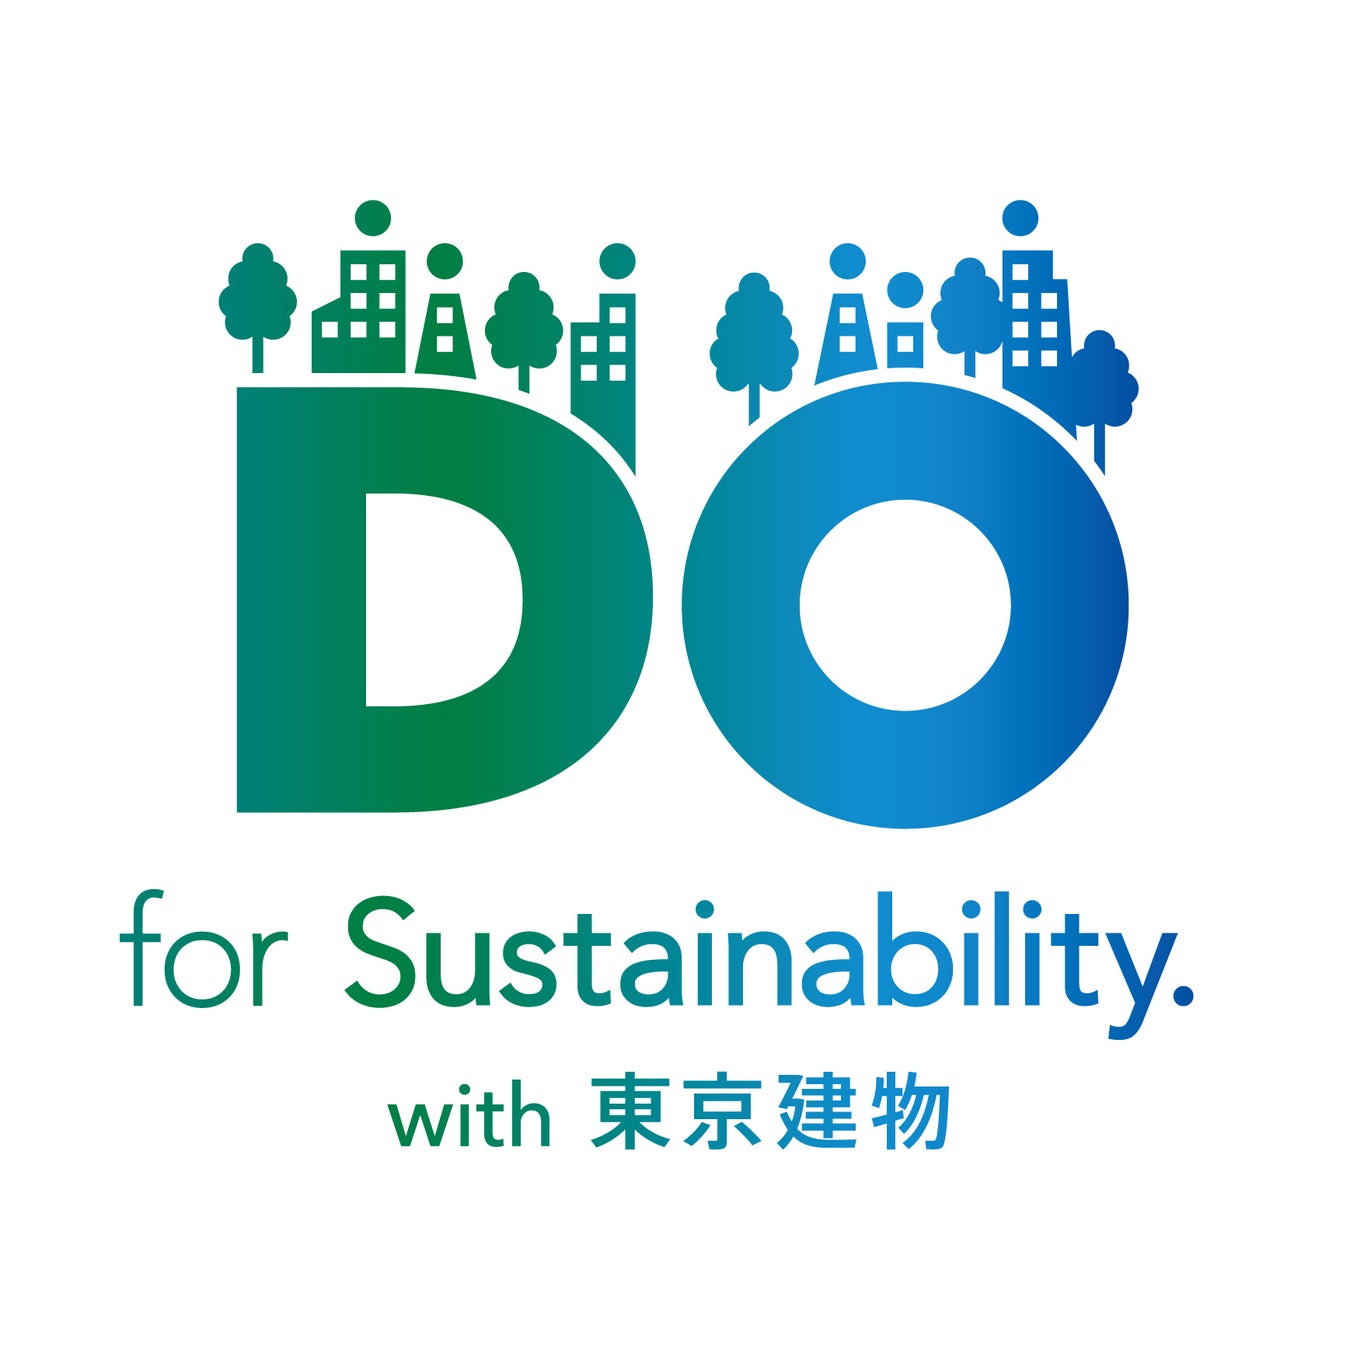 【DO for Sustainability. with 東京建物】bloomoi×AI対談「LOVE & PEACEな暮らし」を開催のサブ画像4